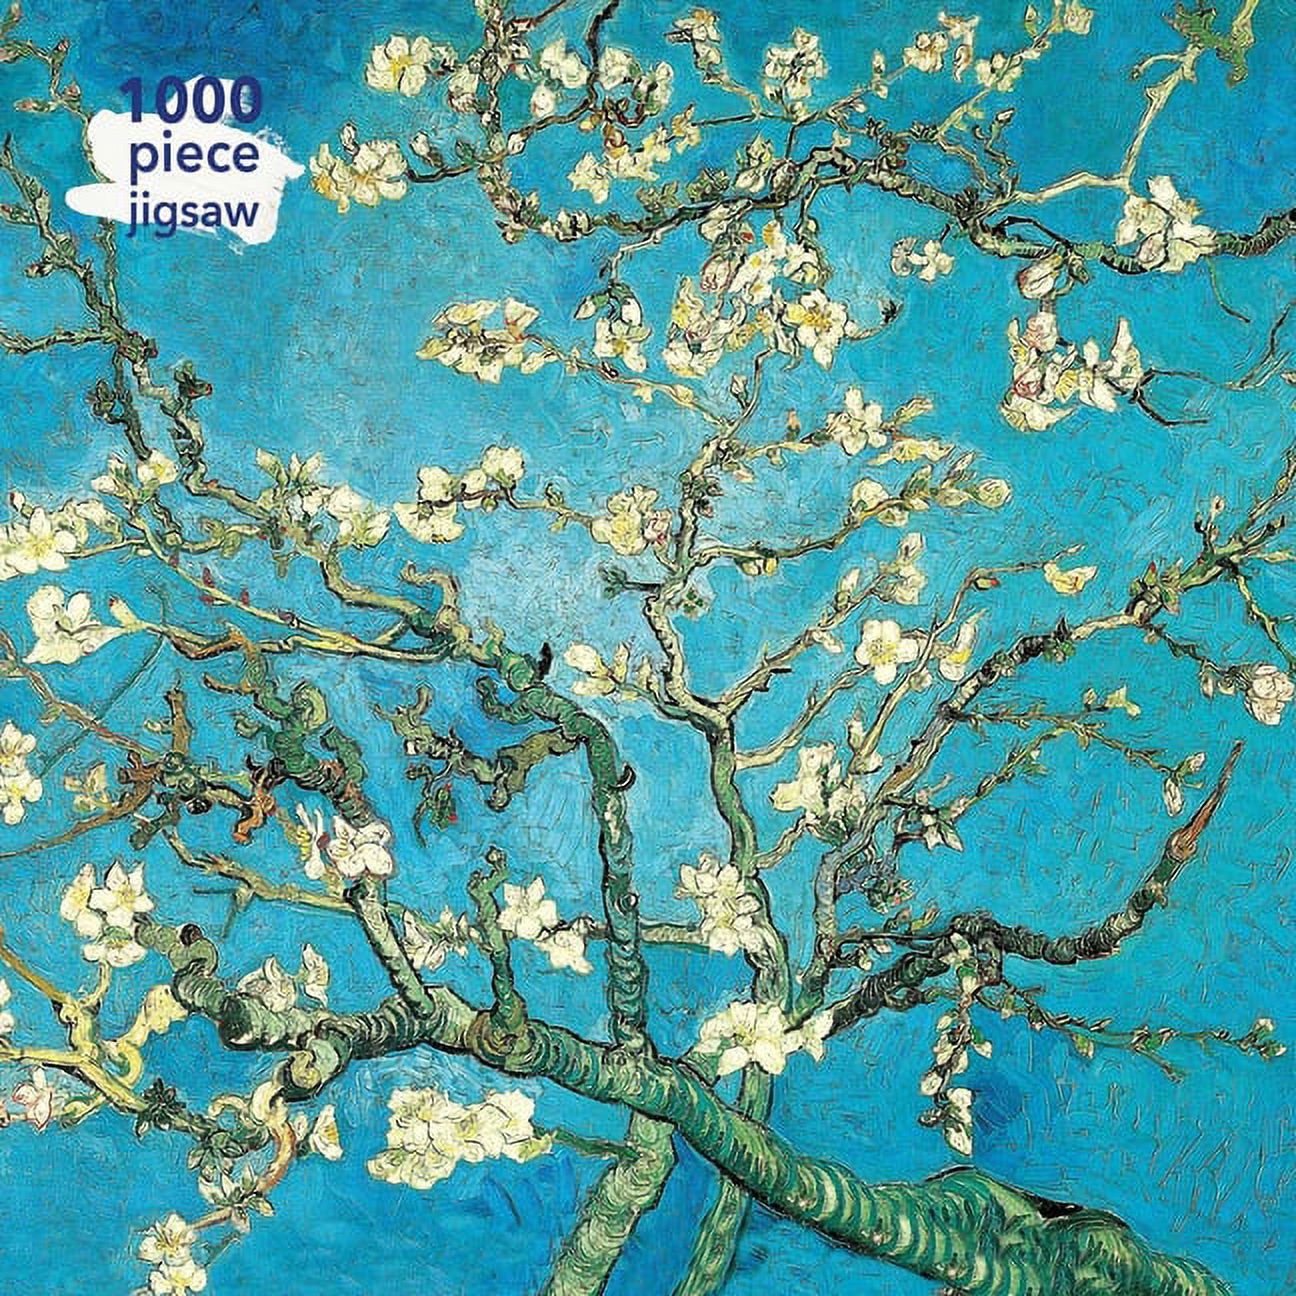 1000-piece Jigsaw Puzzles: Adult Jigsaw Puzzle Vincent van Gogh: Almond Blossom : 1000-Piece Jigsaw Puzzles (Jigsaw) - image 1 of 3